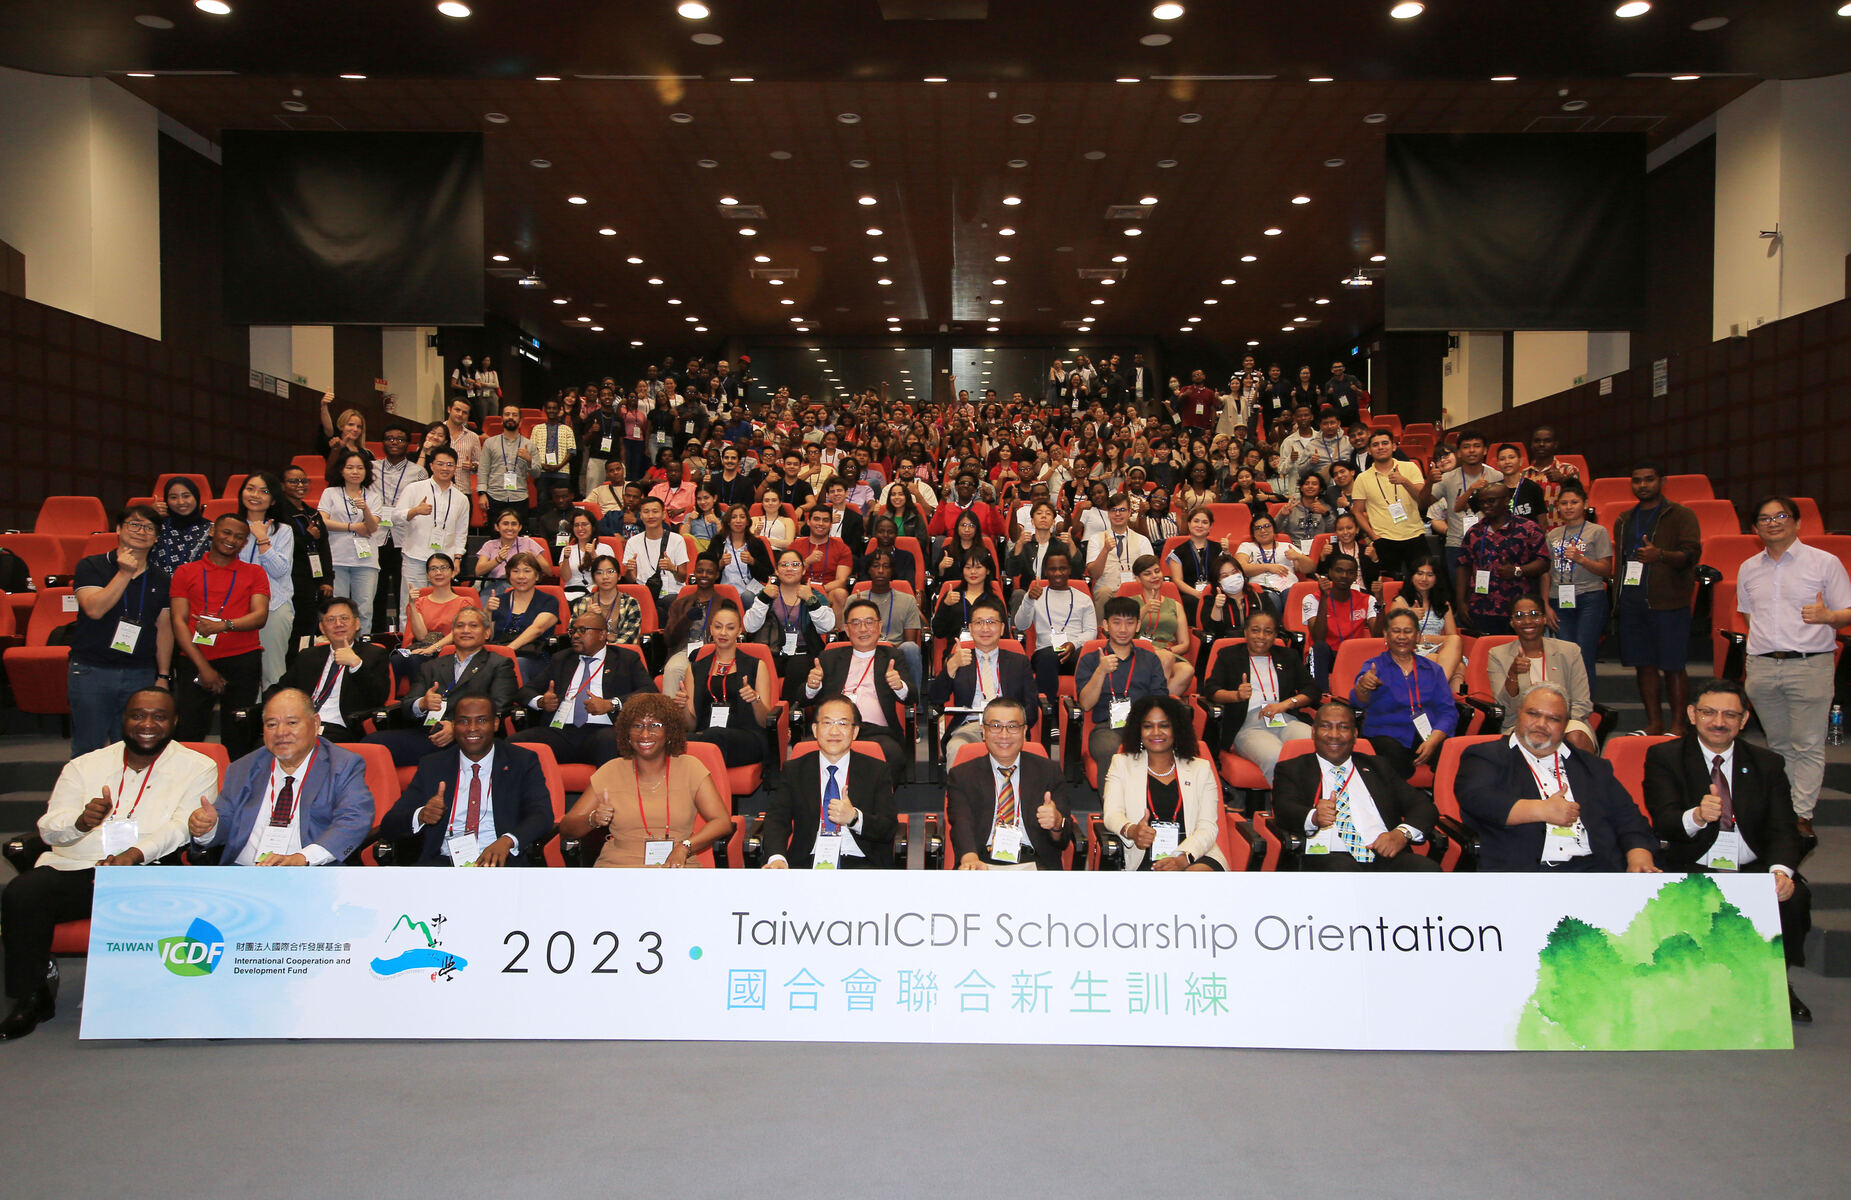 Guests participating in the 2023 TaiwanICDF Scholarship Orientation include eight ambassadors from Saint Vincent and the Grenadines, Belize, the Republic of Haiti, Saint Lucia, Tuvalu, the Republic of Palau, Saint Christopher and Nevis, and the Republic of Guatemala